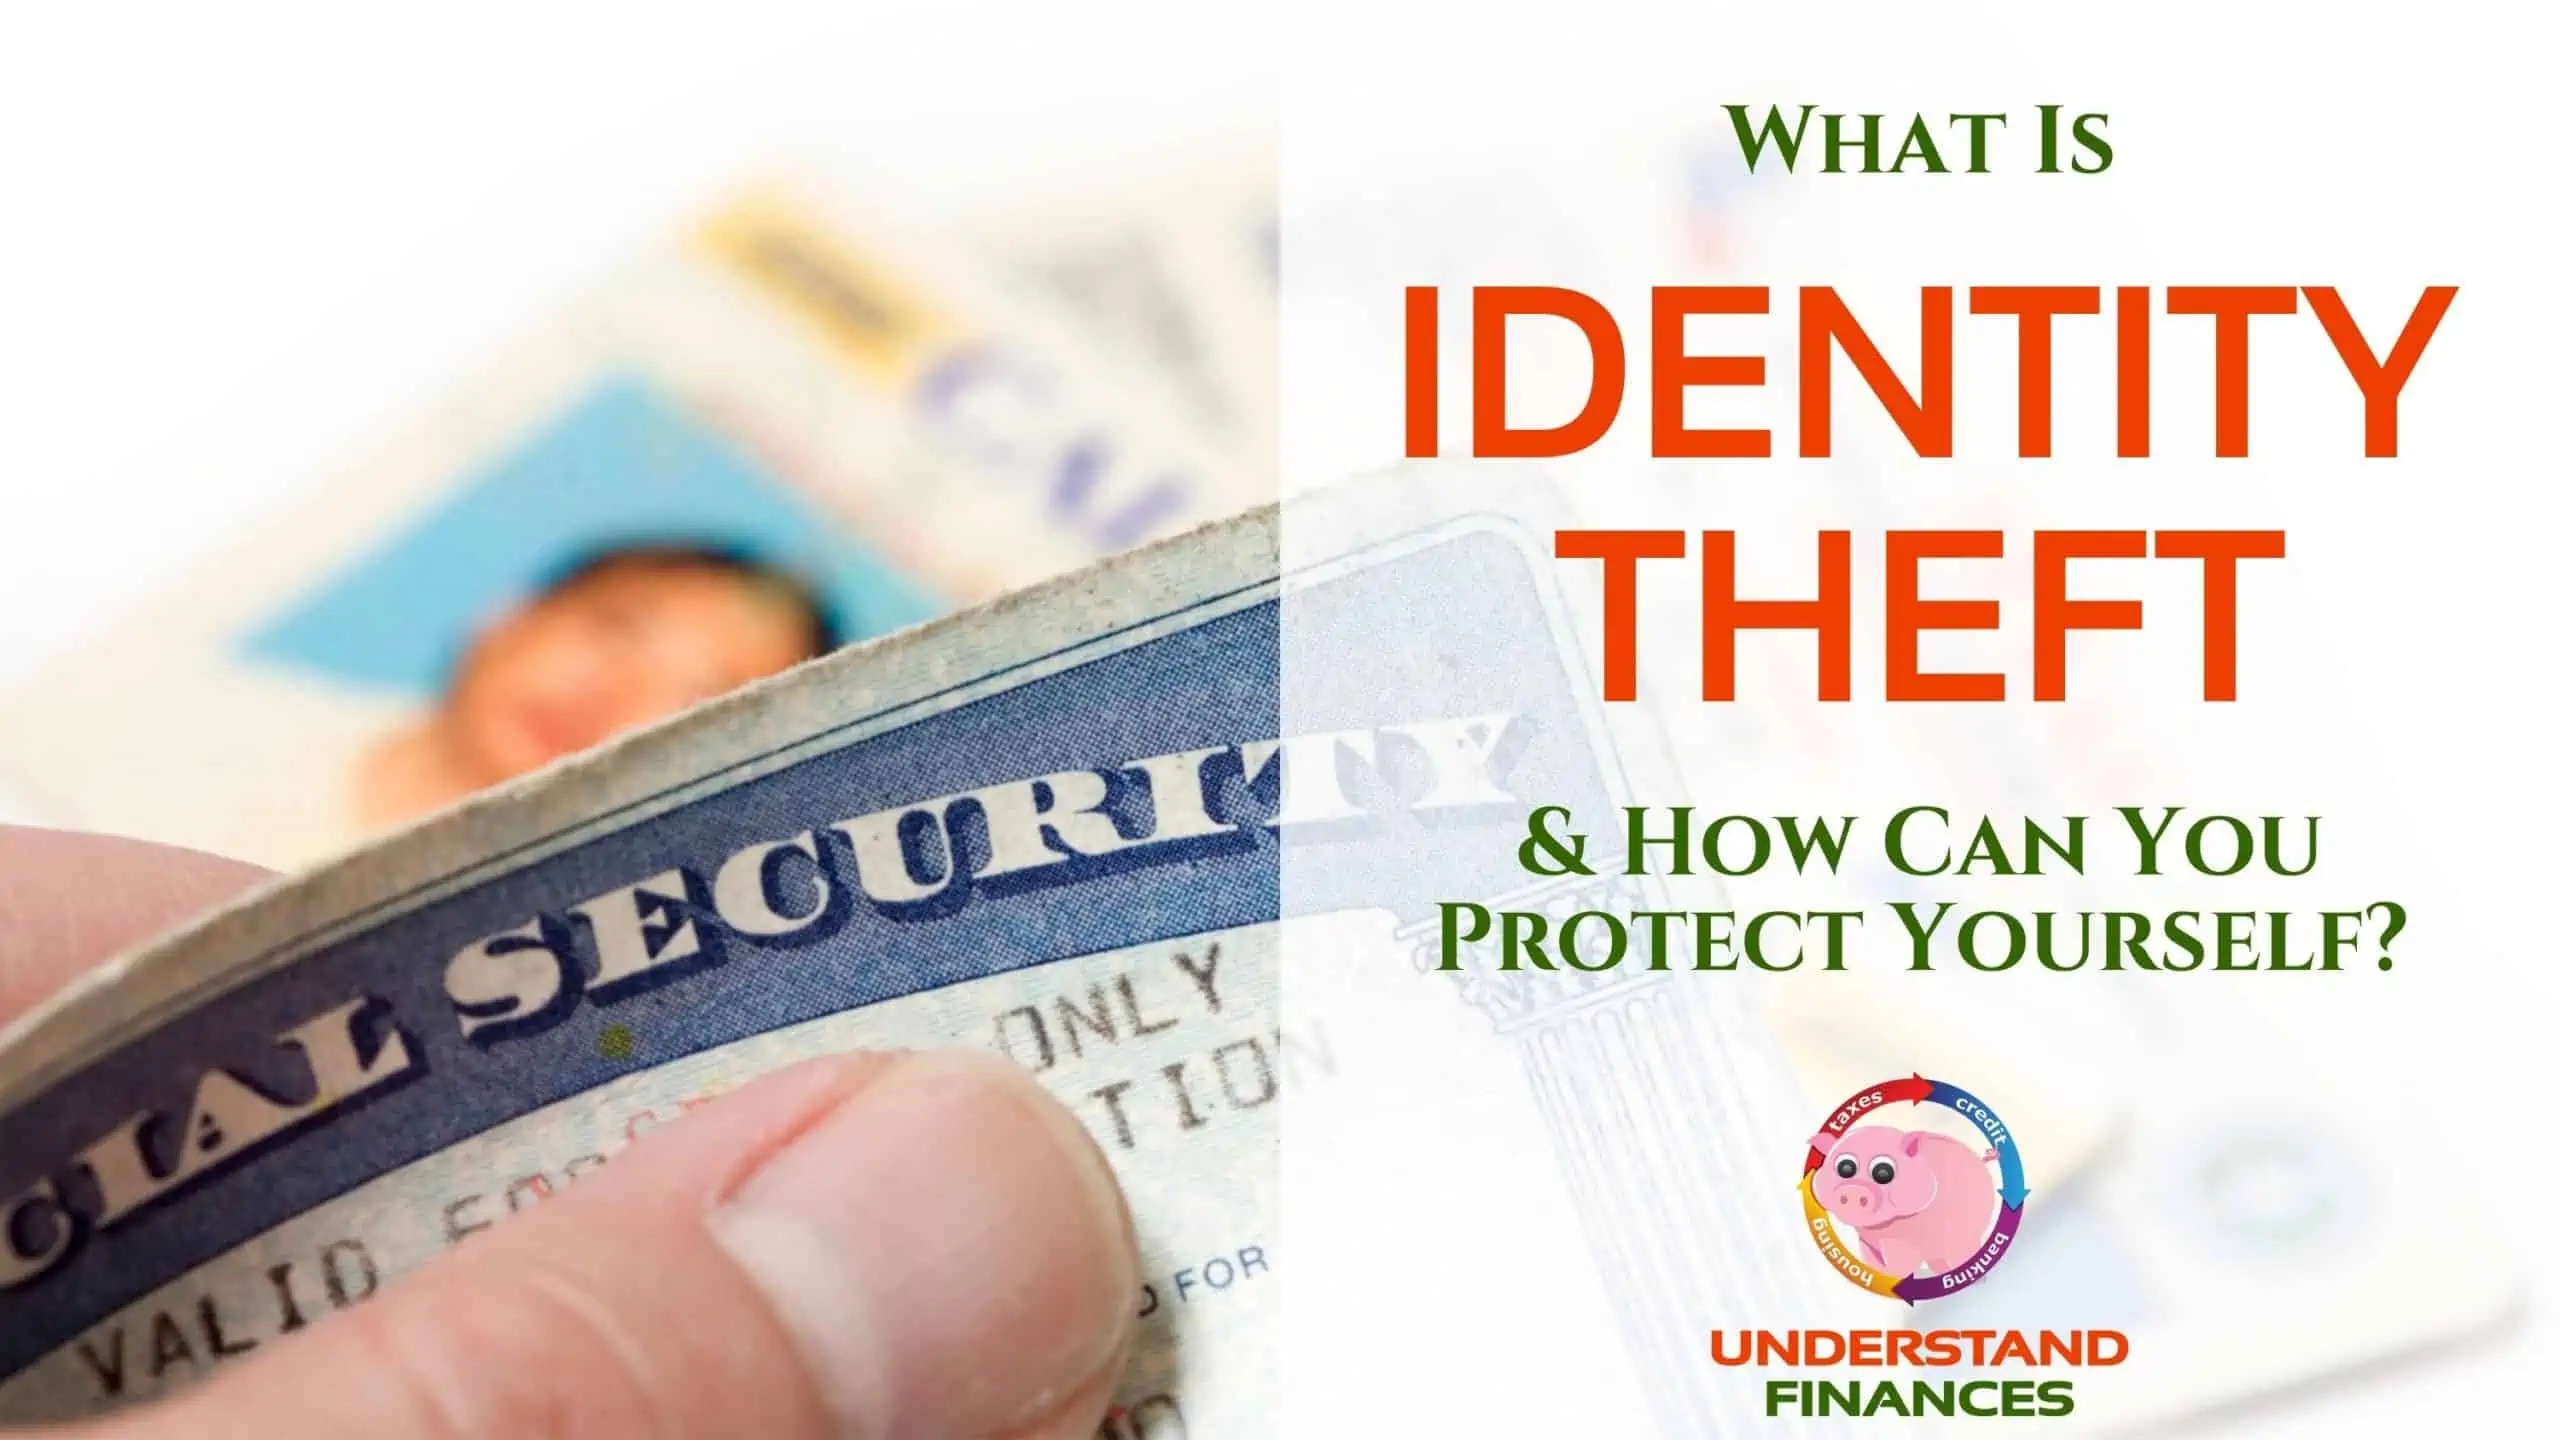 What Is Identity Theft & How Can You Protect Yourself?